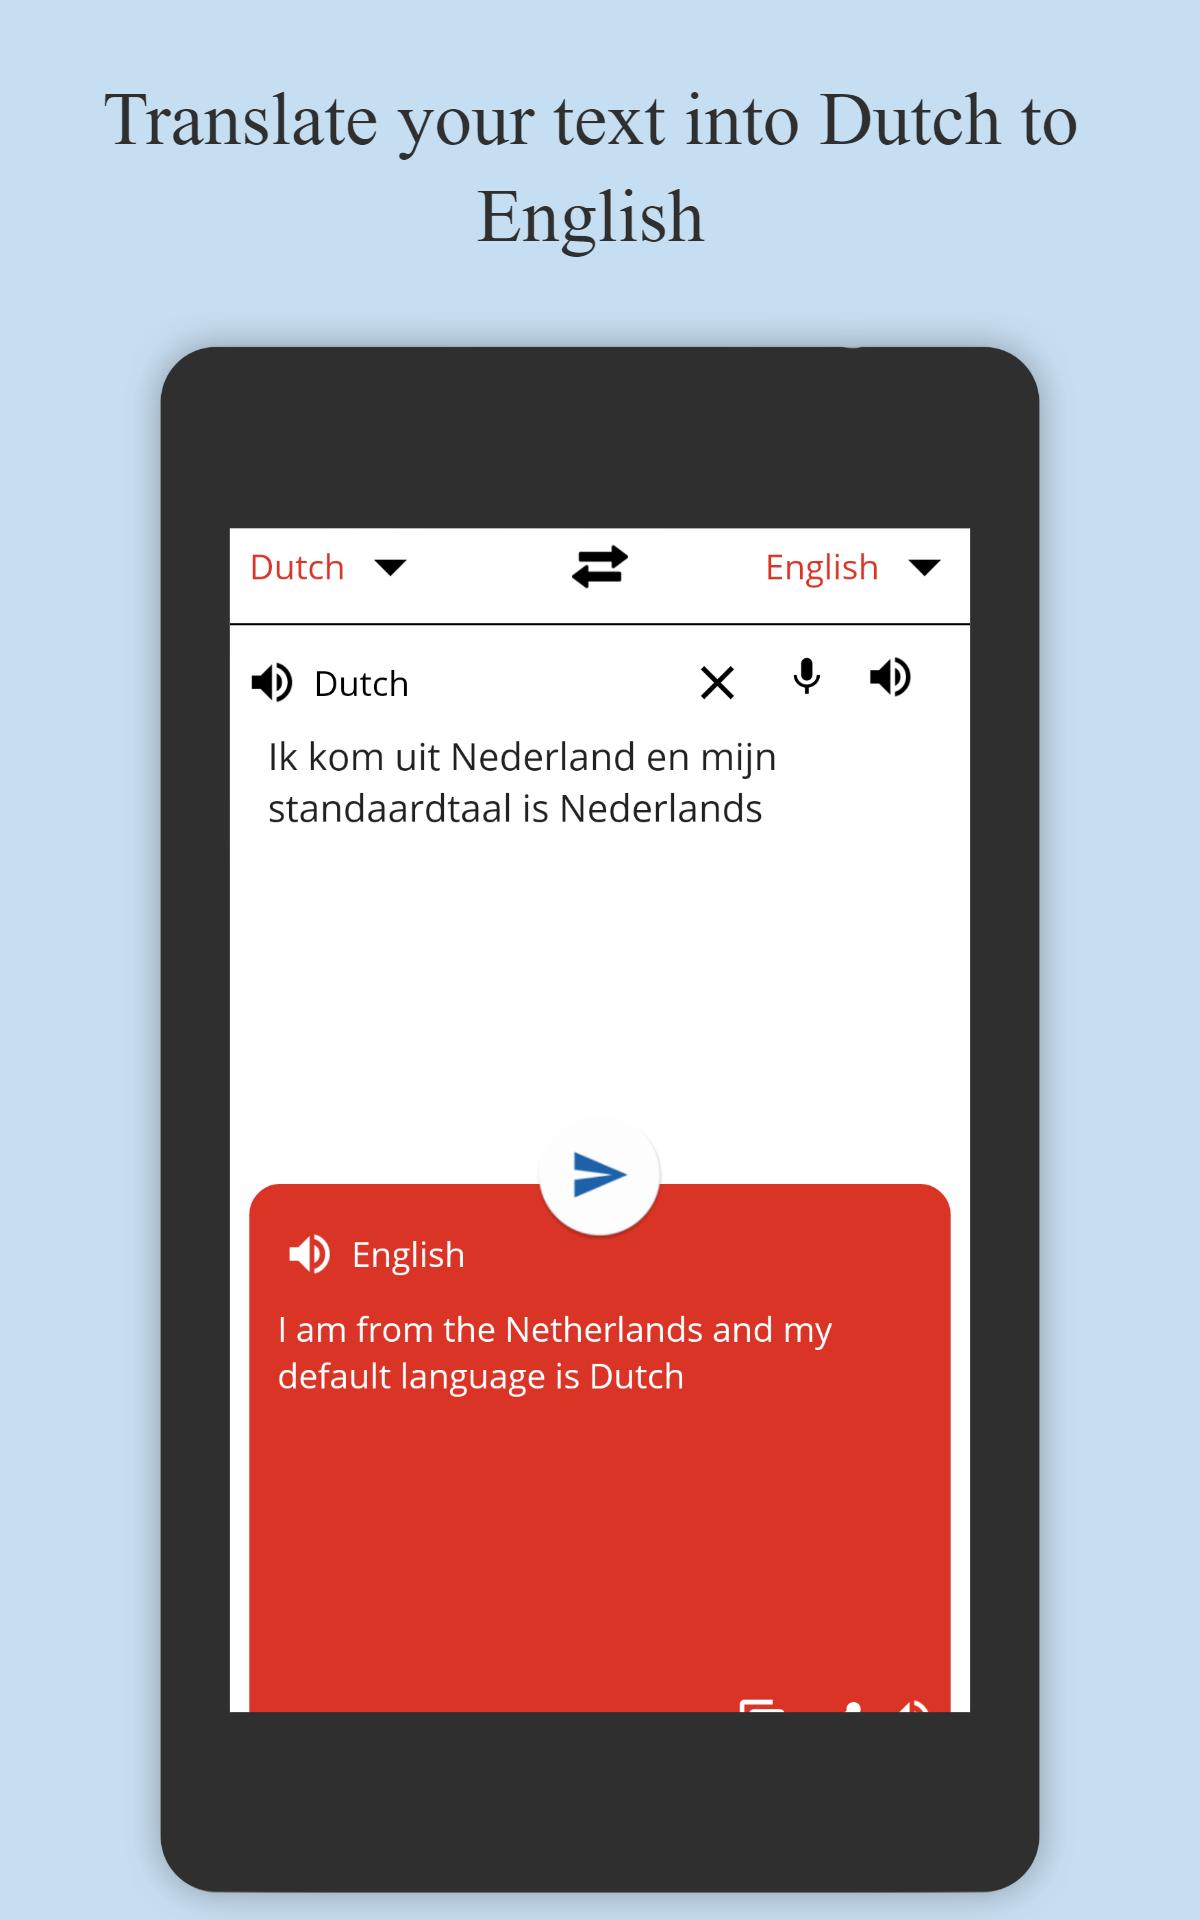 zakdoek Spectaculair Hedendaags English to Dutch Translator - Free App Translate for Android - APK Download